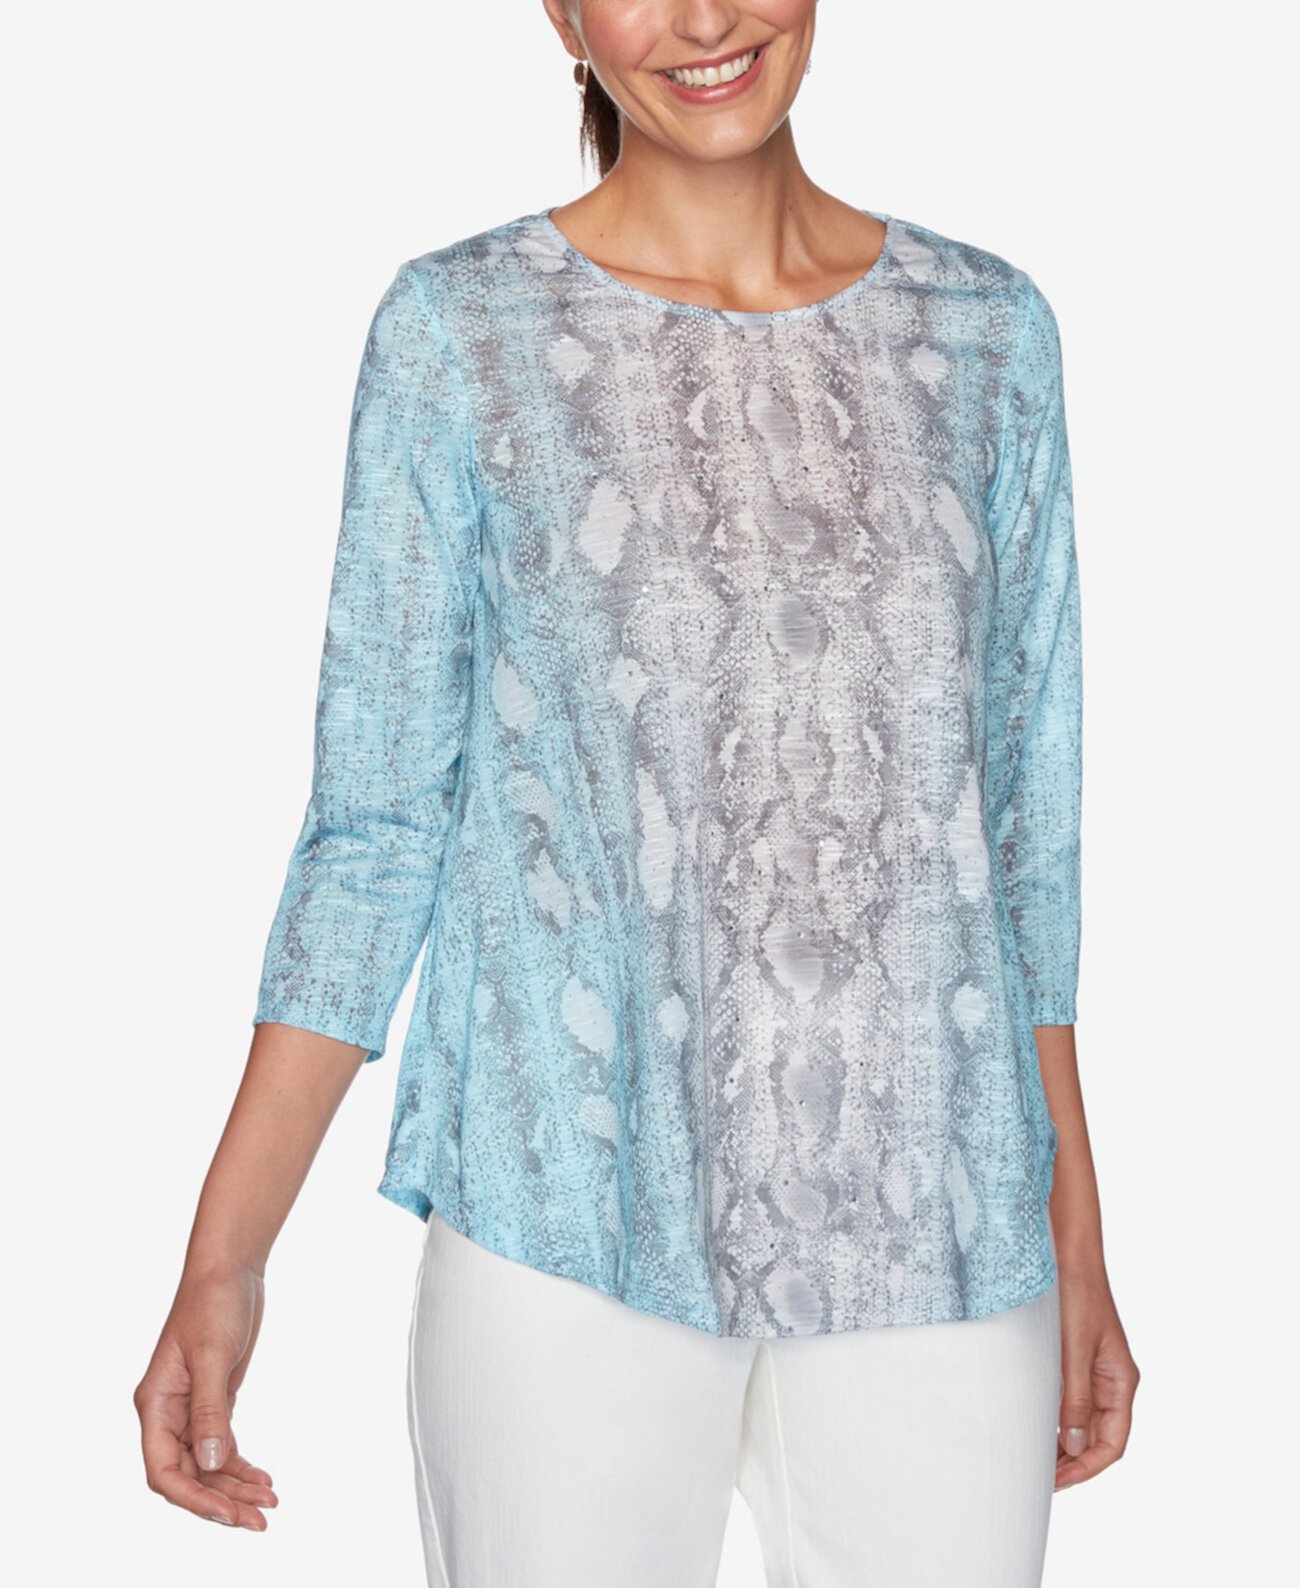 Women's Knit Embellished Snake Print Top Ruby Rd.